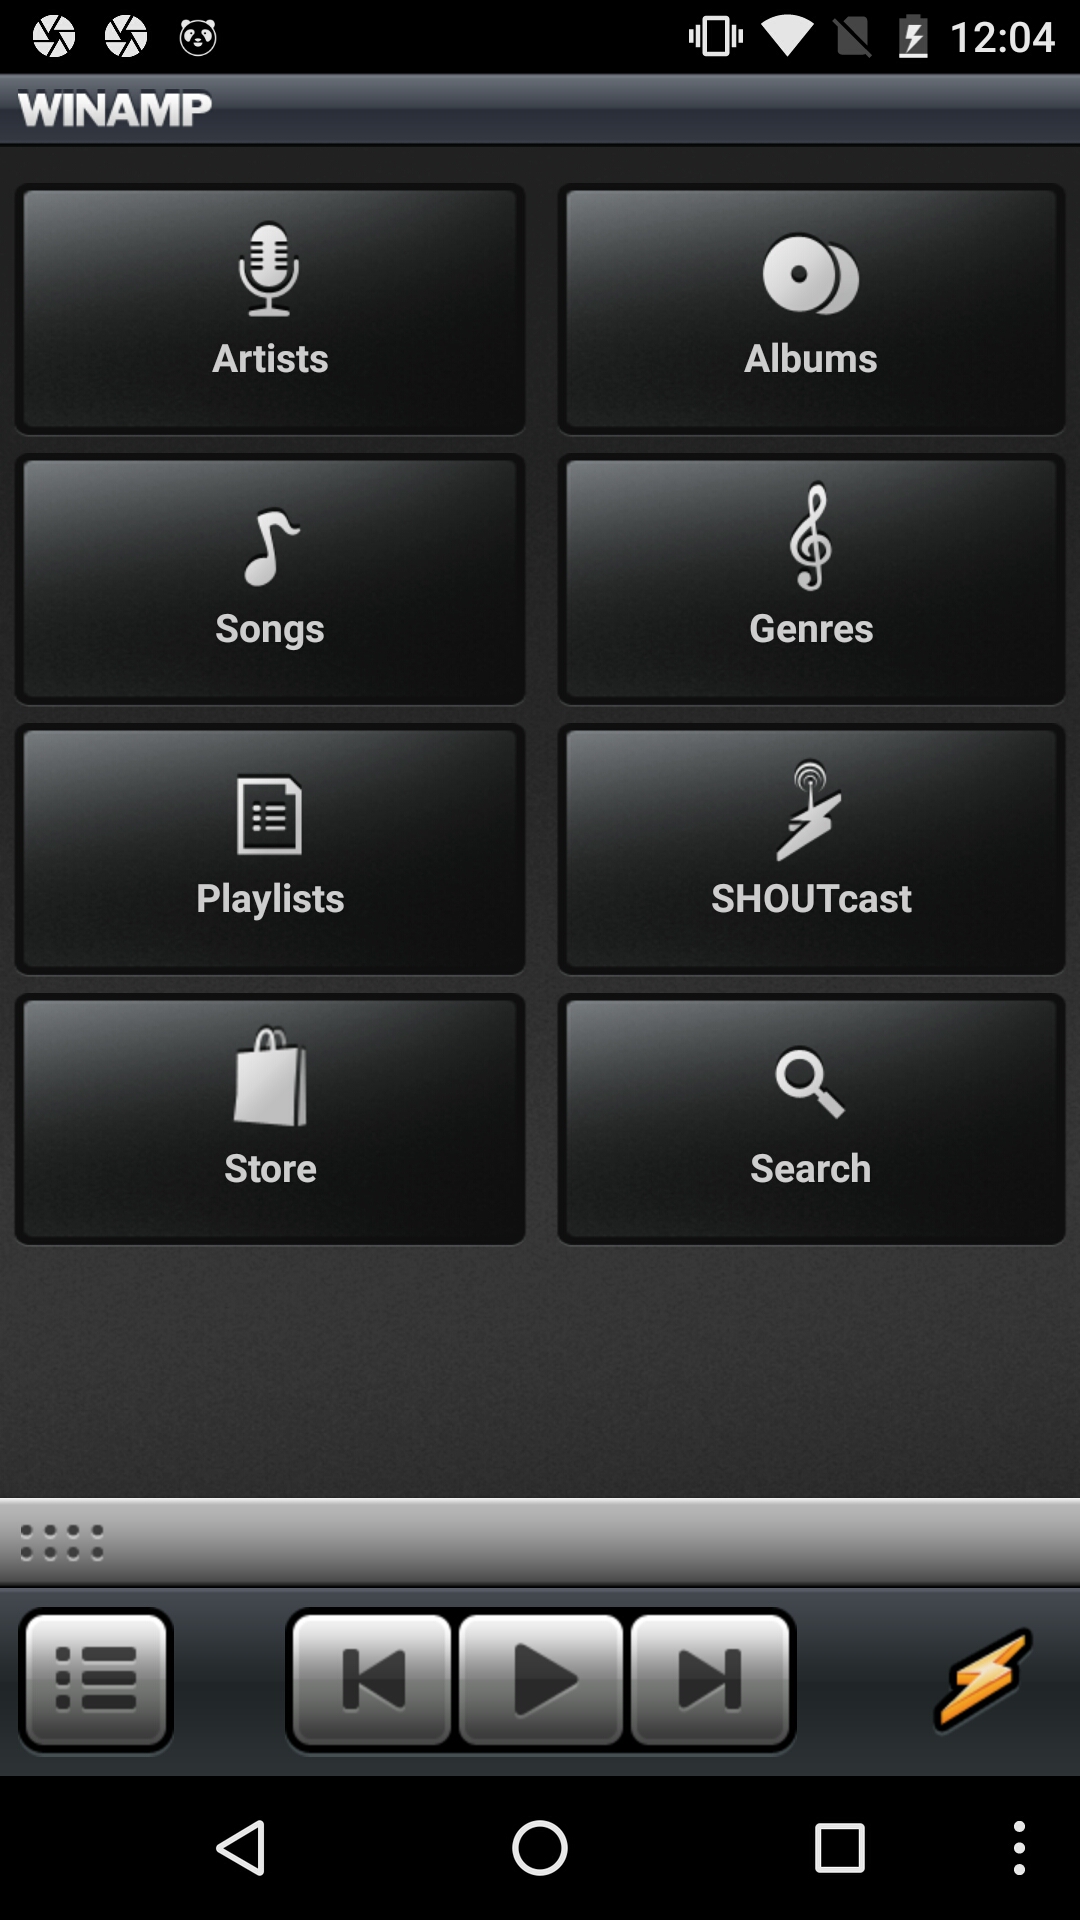 winamp pro apk for android free download